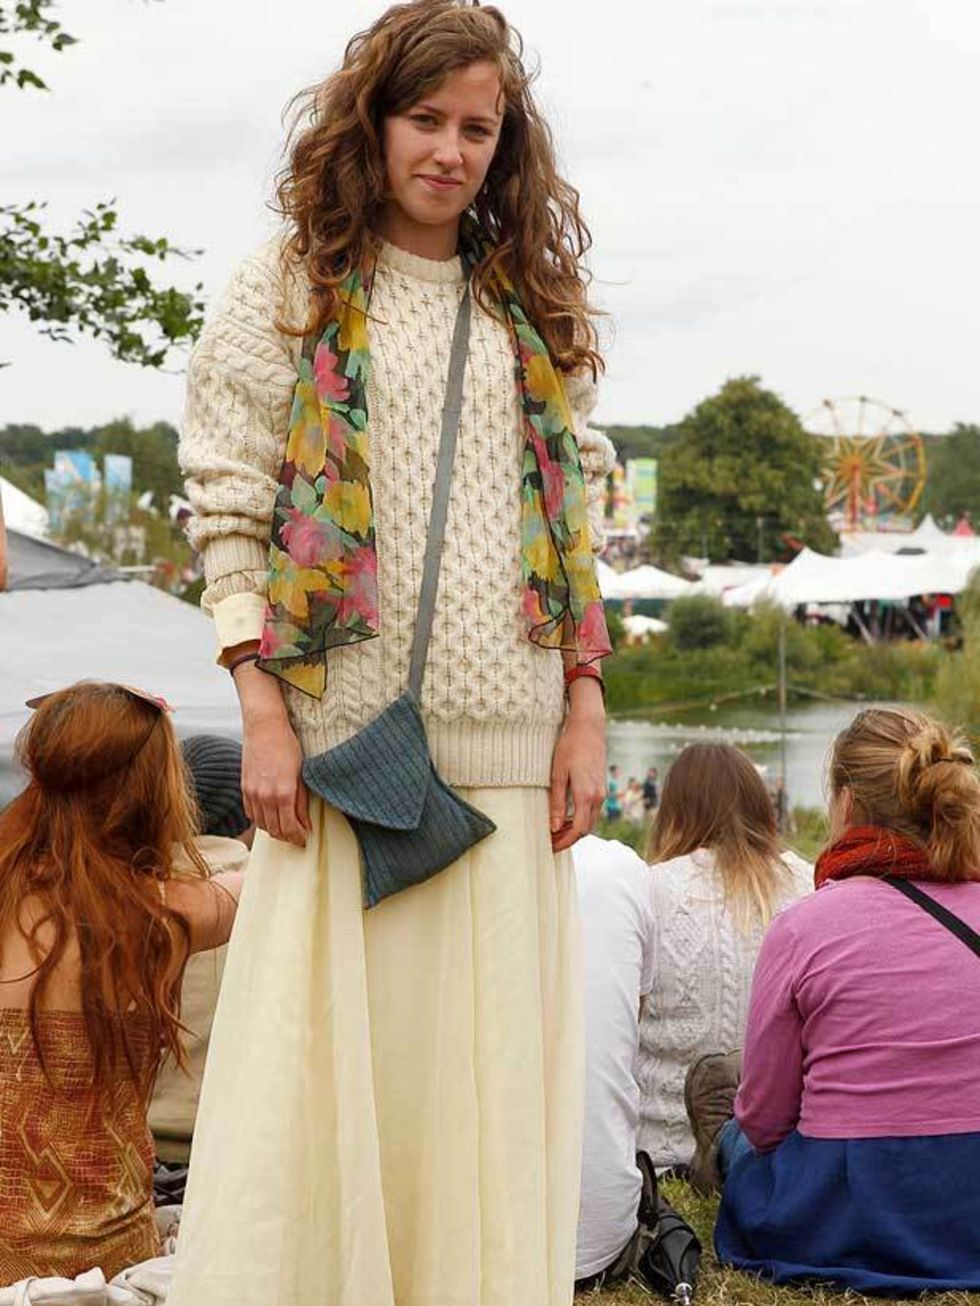 <p>Photo by Anthea SimmsLibby Wait, 23, Publishing. Charity shop jumper, skirt from New York, scarf from Camden, bag from festival stall.</p><p><a href="http://www.elleuk.com/style/street-style/secret-garden-party-2011">Secret Garden Party </a></p>